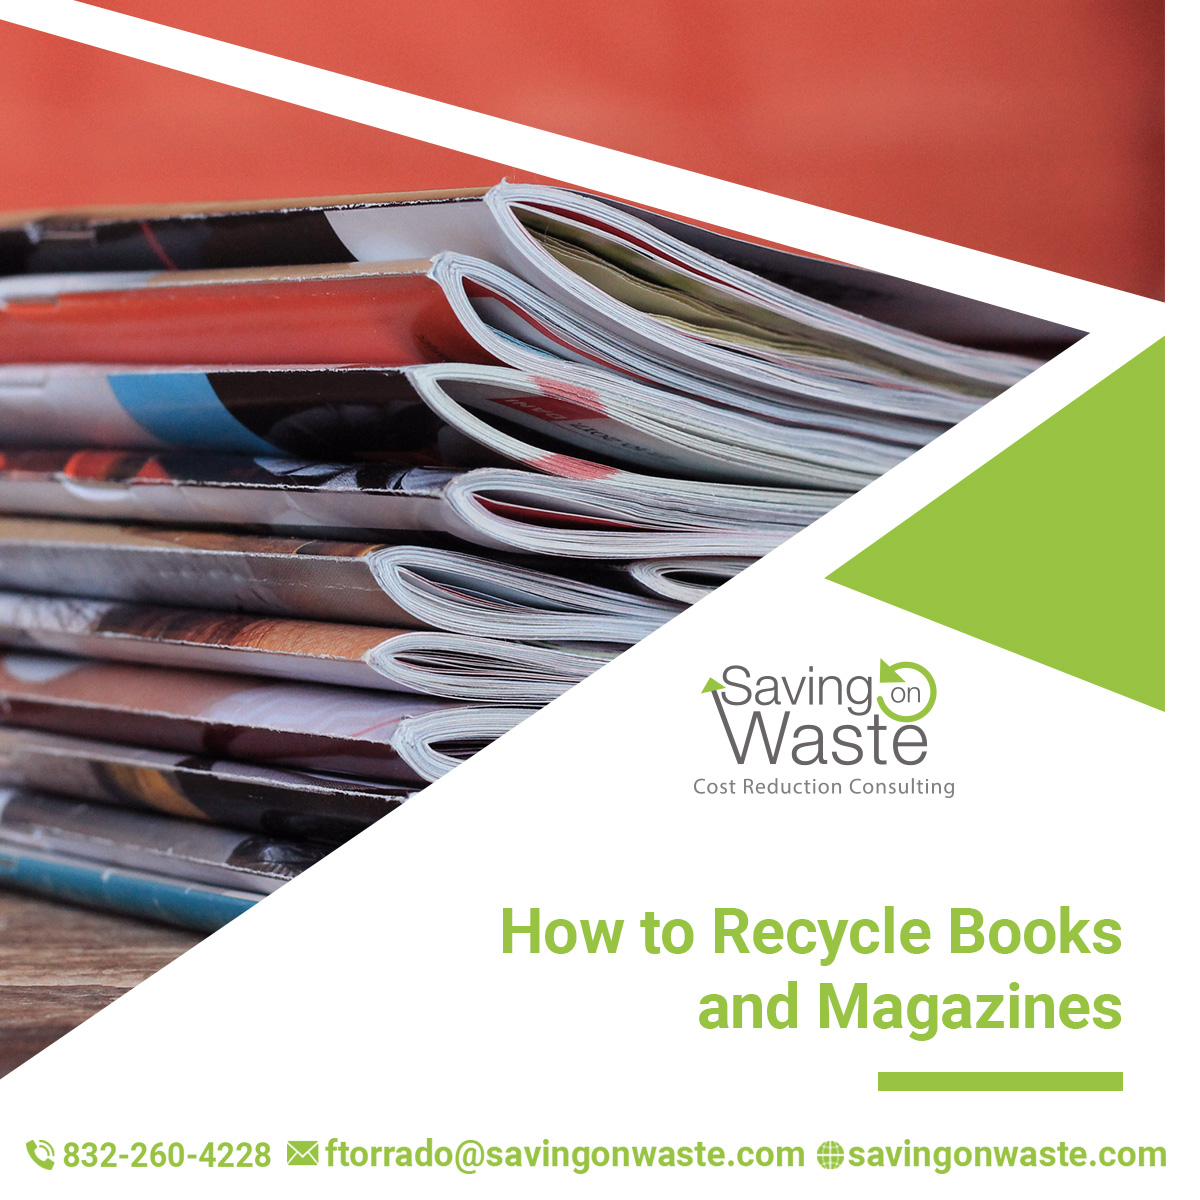 24 How to Recycle Books and Magazines